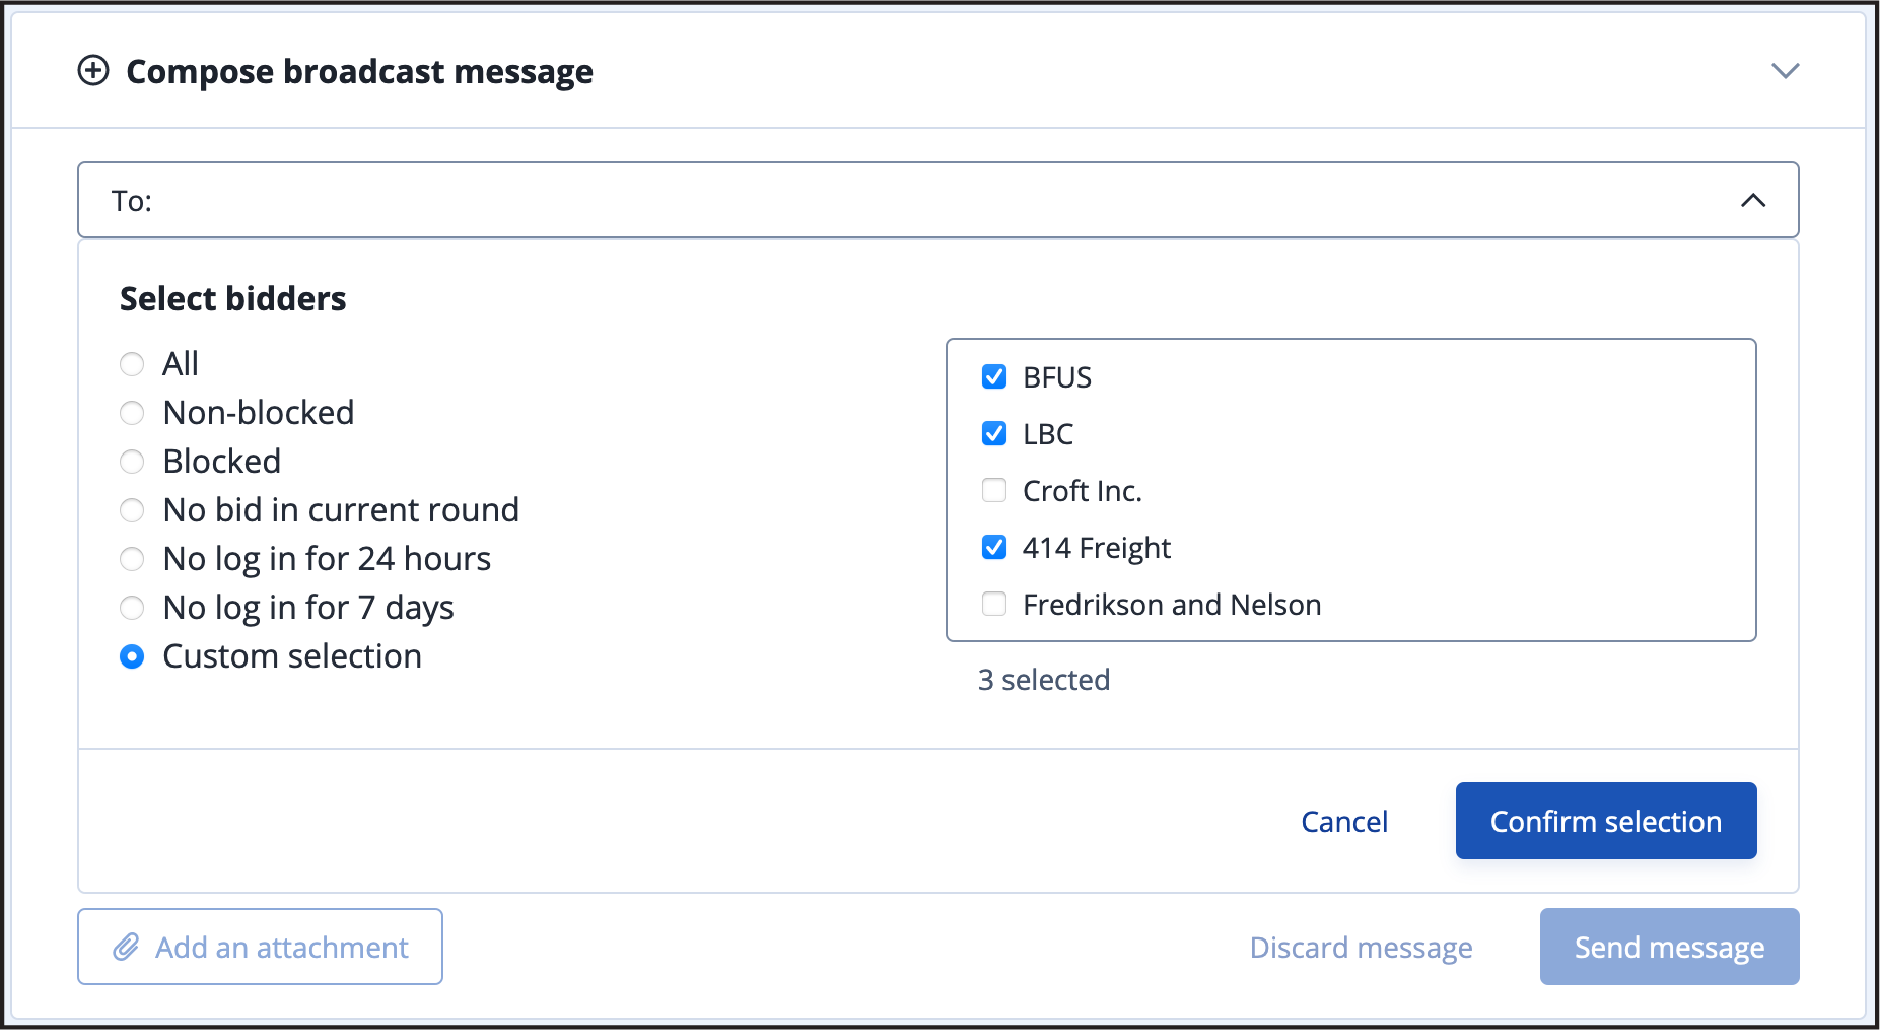 Compose message area — multiple bidders selected